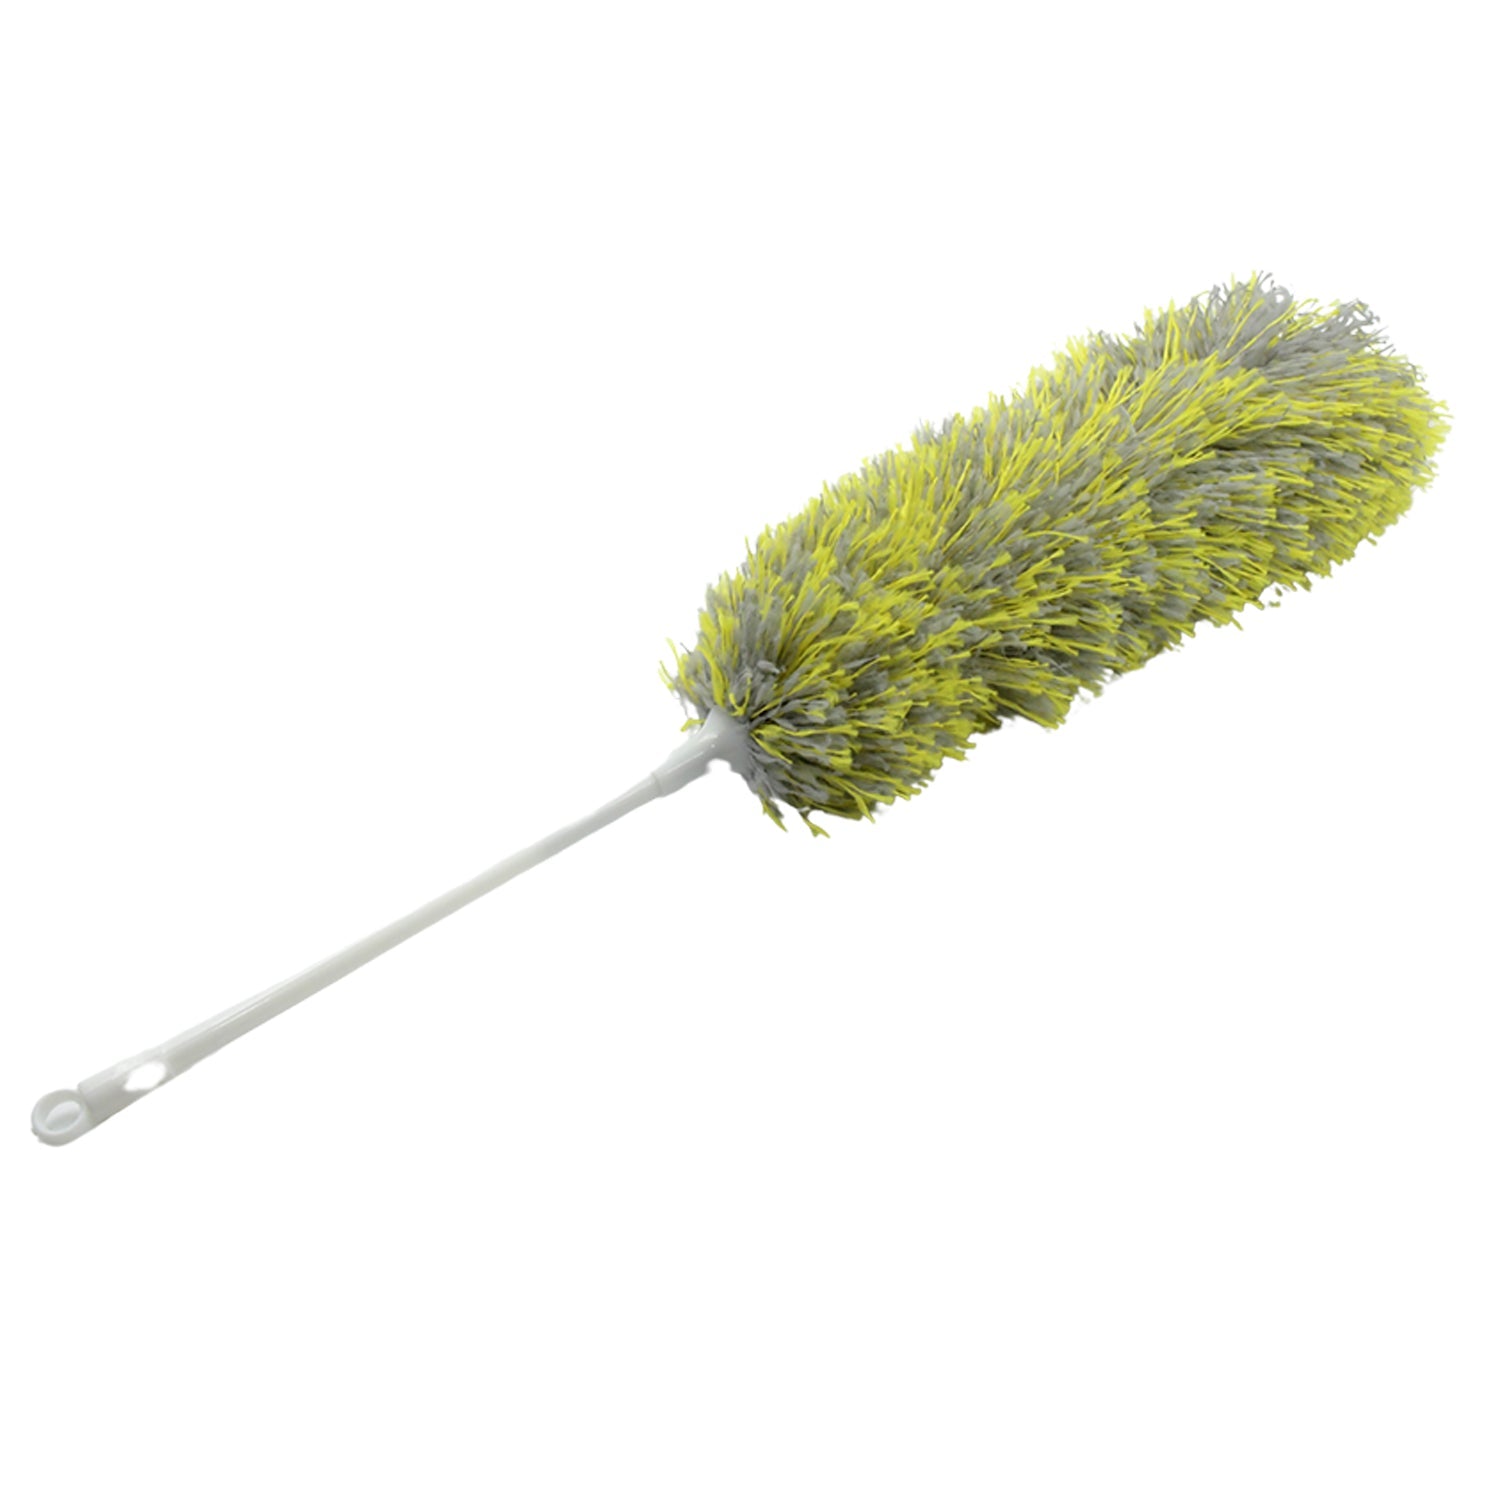 8862 Long Handle, Microfiber Duster for Cleaning, Microfiber Hand Duster Washable Microfiber Cleaning Tool Extendable Dusters for Cleaning Office, Car, Computer, Air Condition, Washable Duster (62Cm)